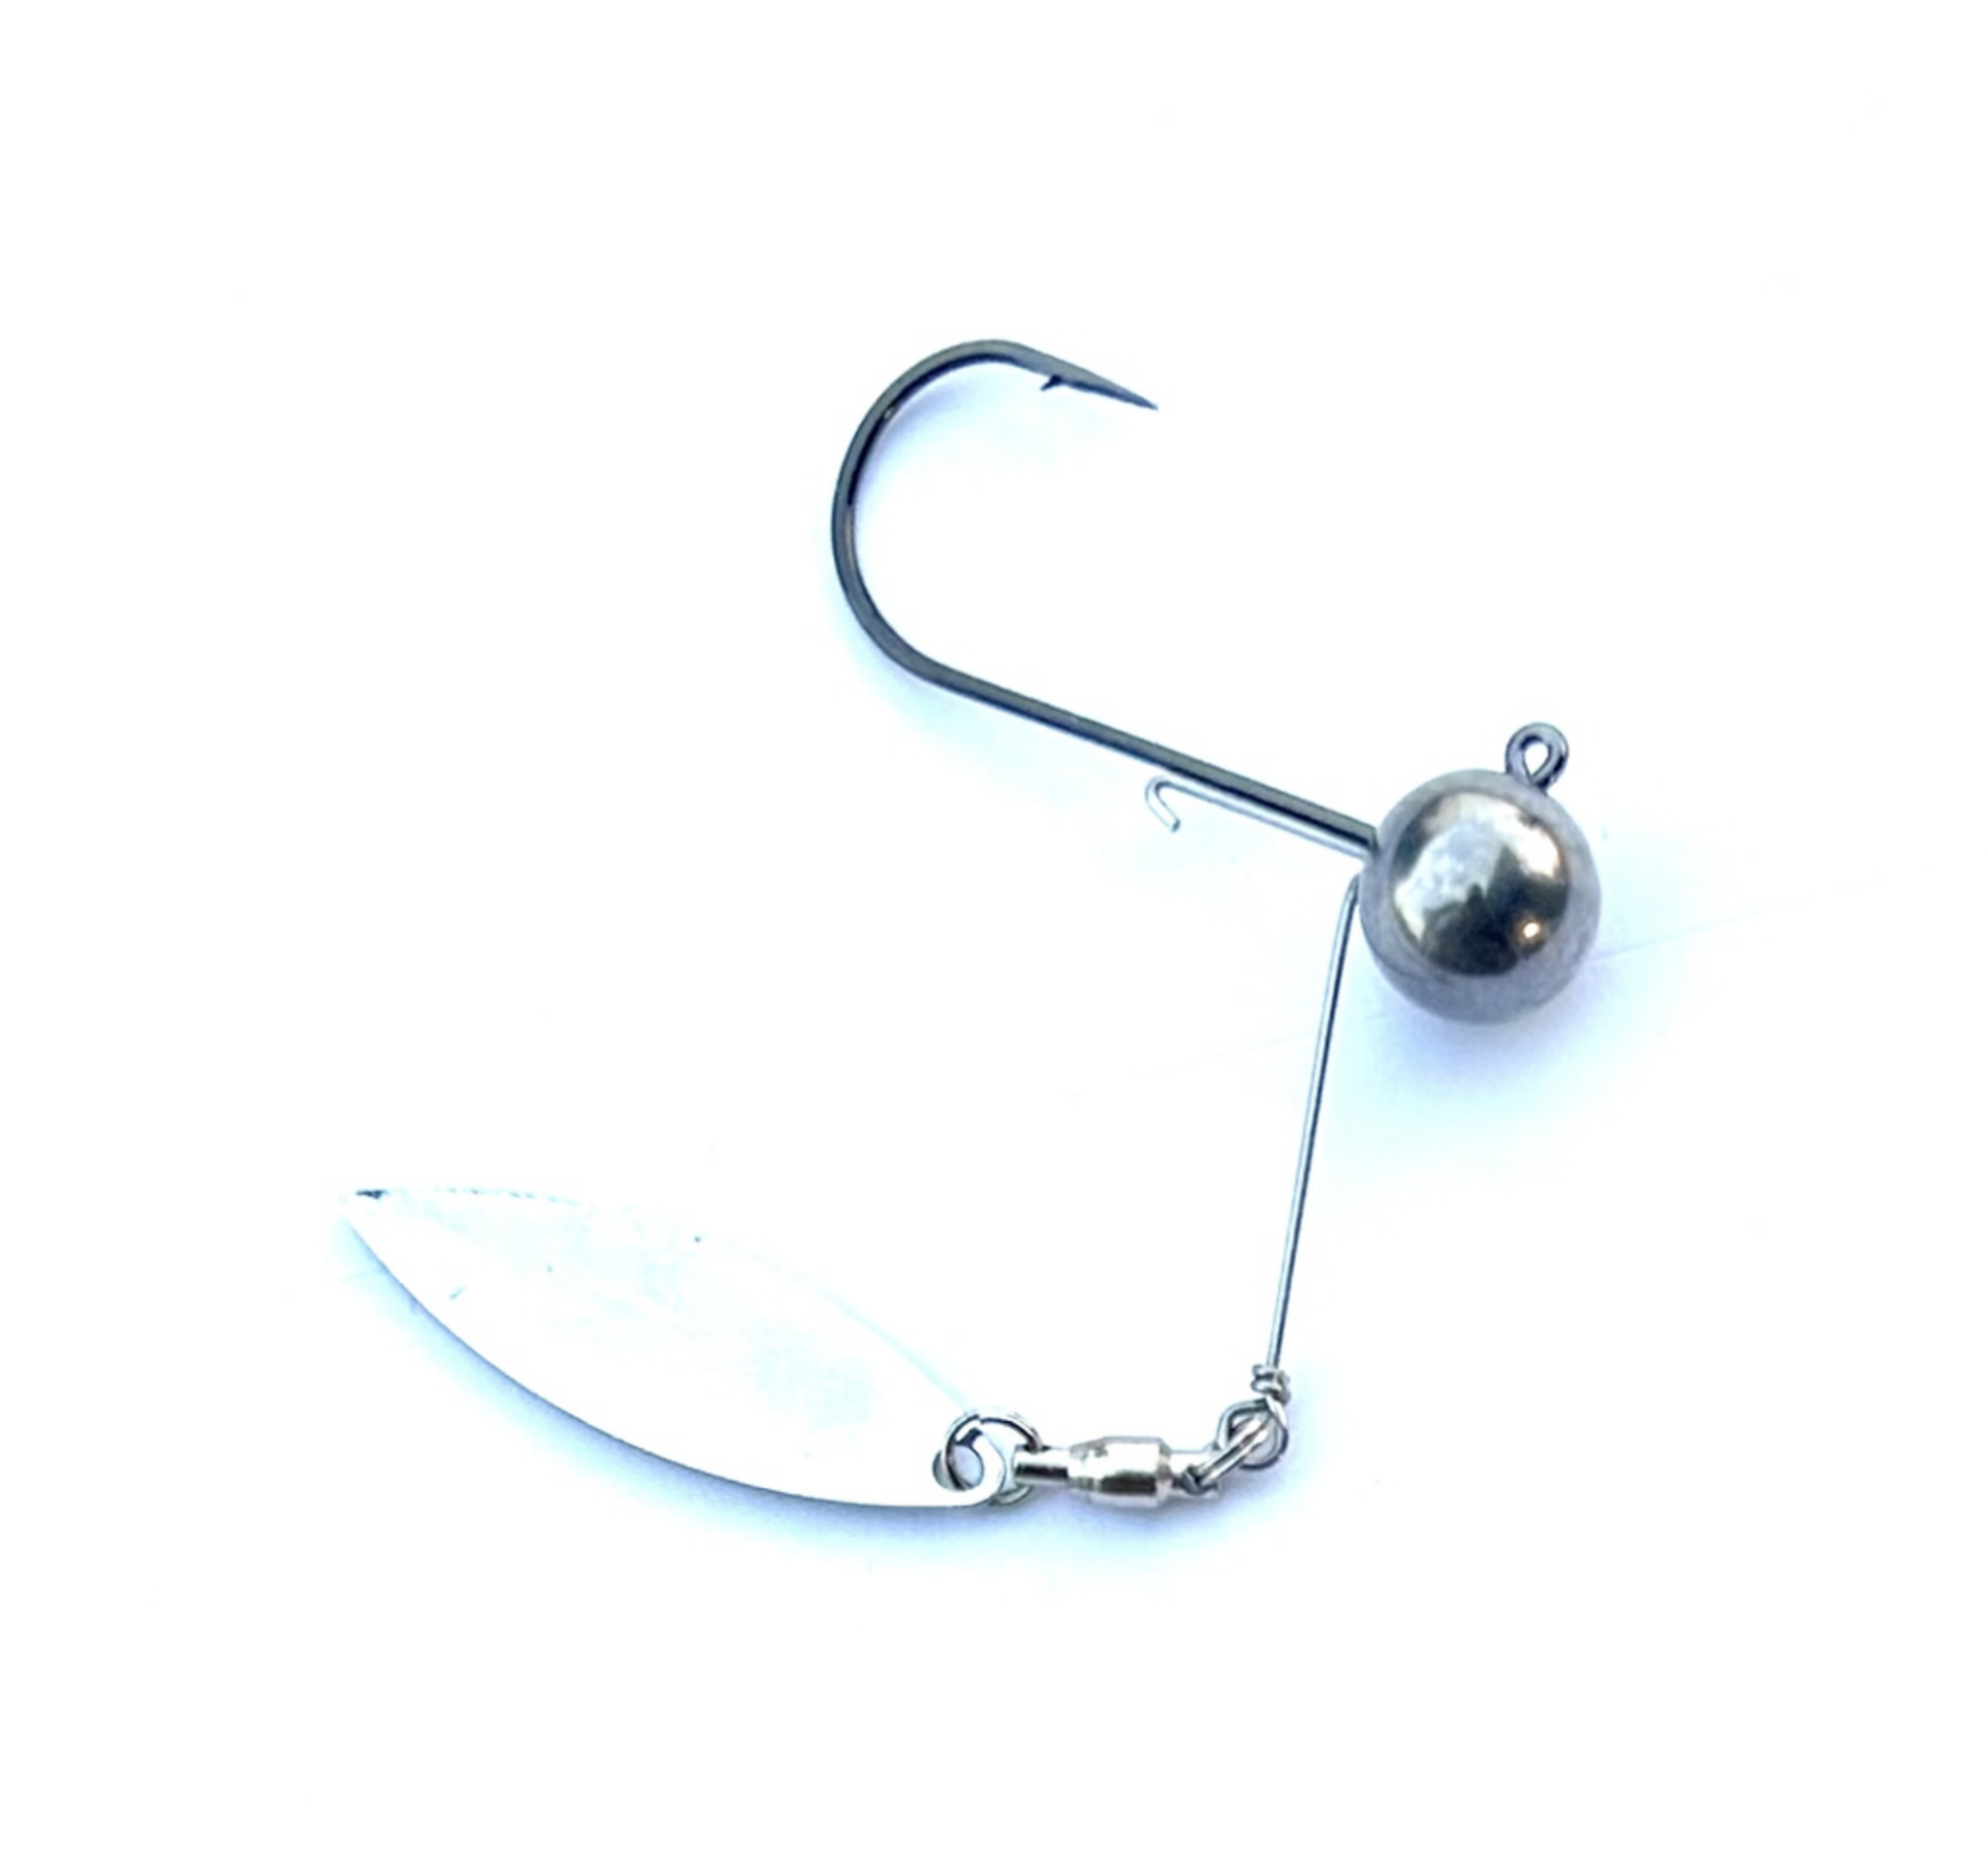 Swimbait Heads - Modern Outdoor Tackle